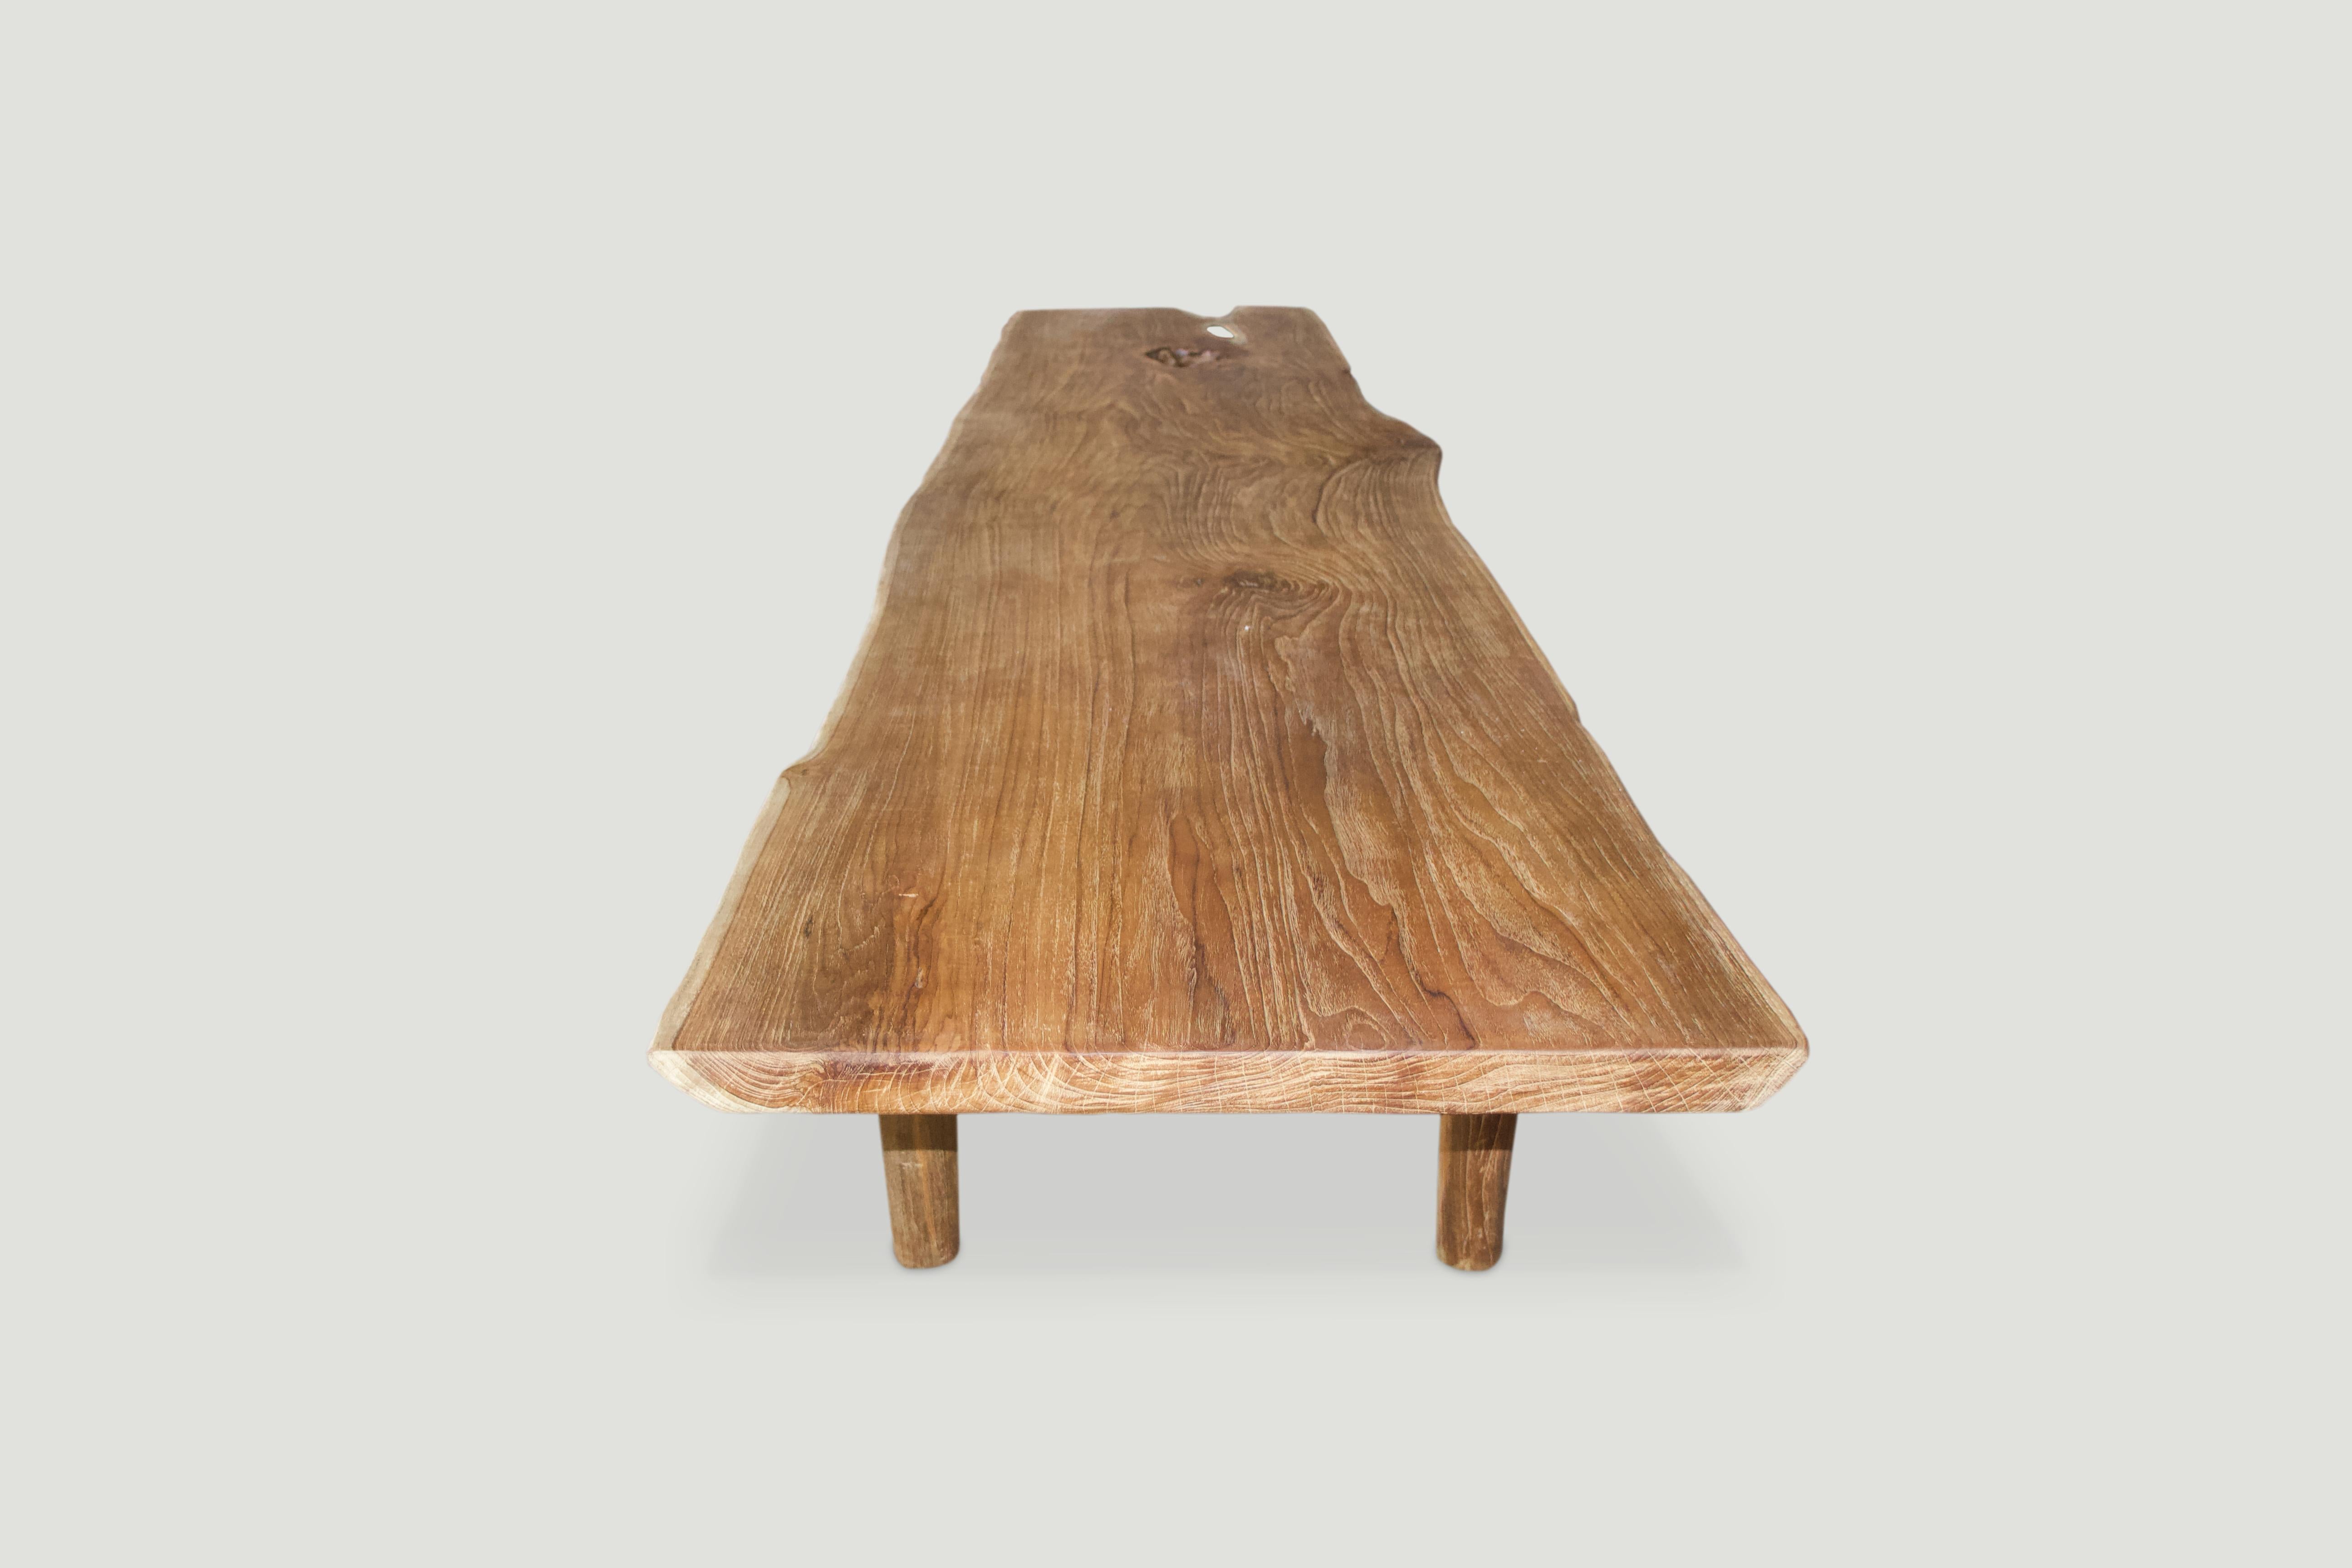 Impressive live edge reclaimed teak coffee table or bench. Stunning grain in this single two inch thick slab with a natural oil finish. We added the minimalist cylinder legs and can also increase the height for a console or dining table. Measures: